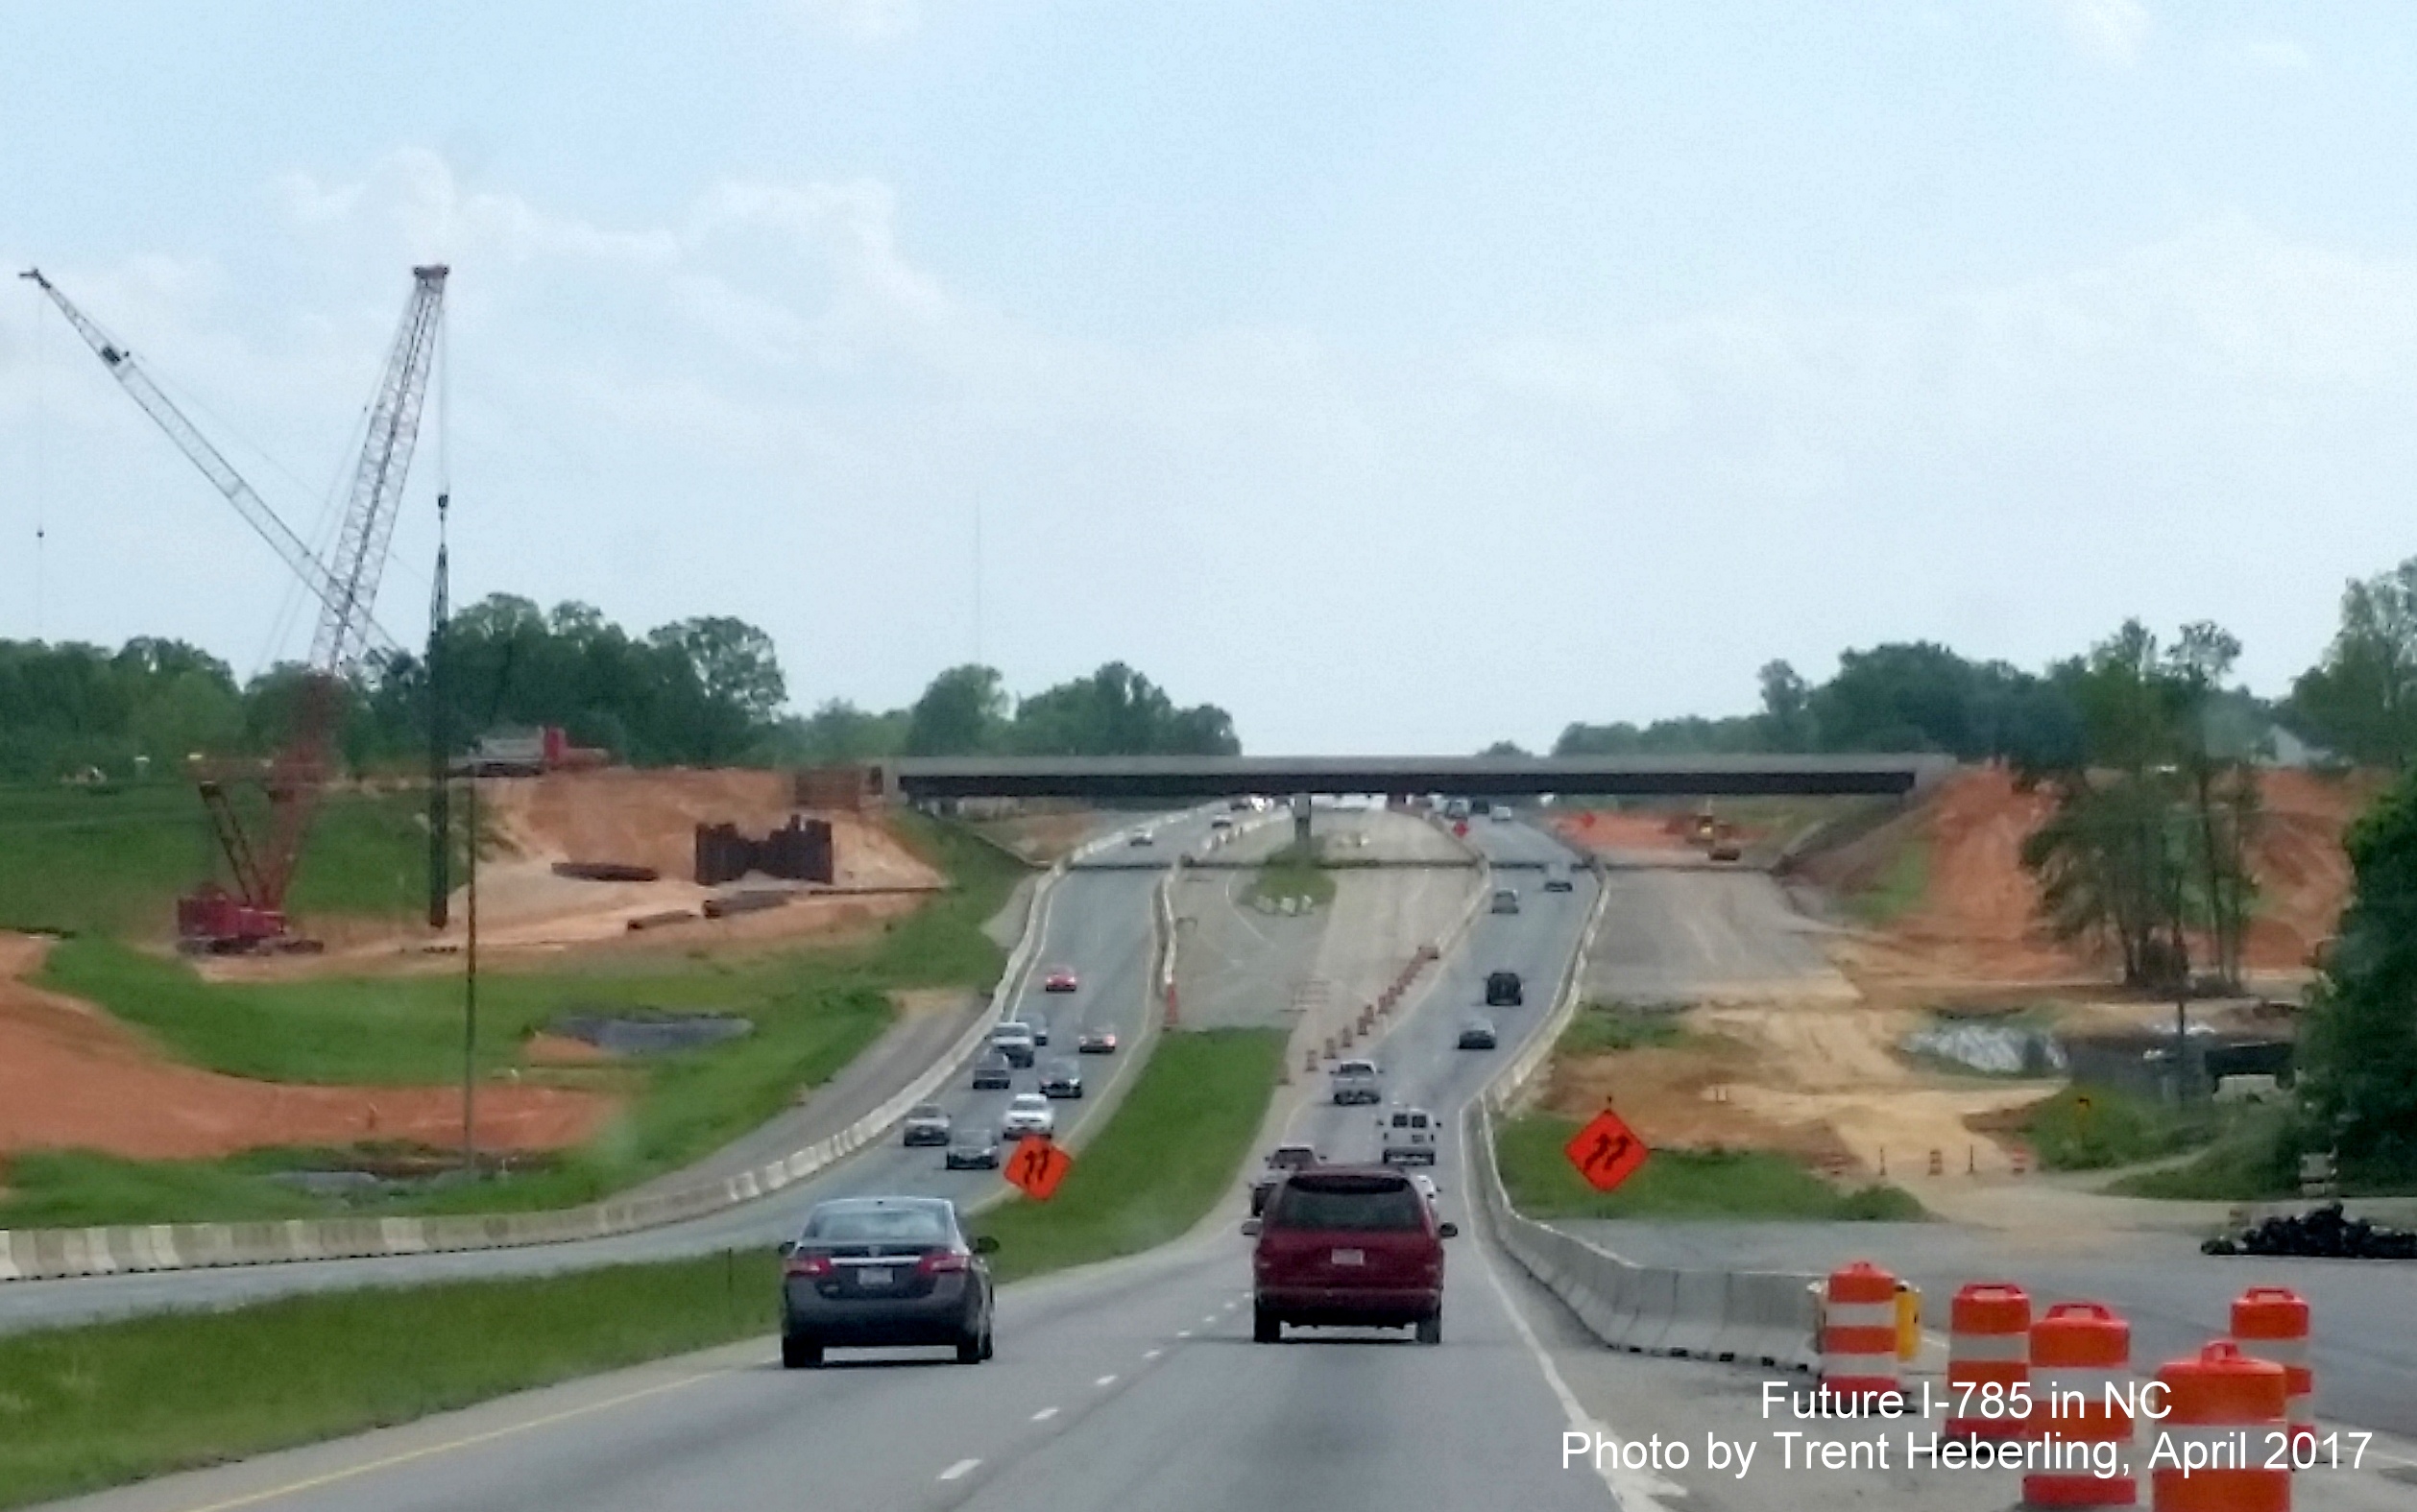 Image looking south on US 29 from Hicone Rd showing I-785/Loop interchange under construction, by Trent Heberling